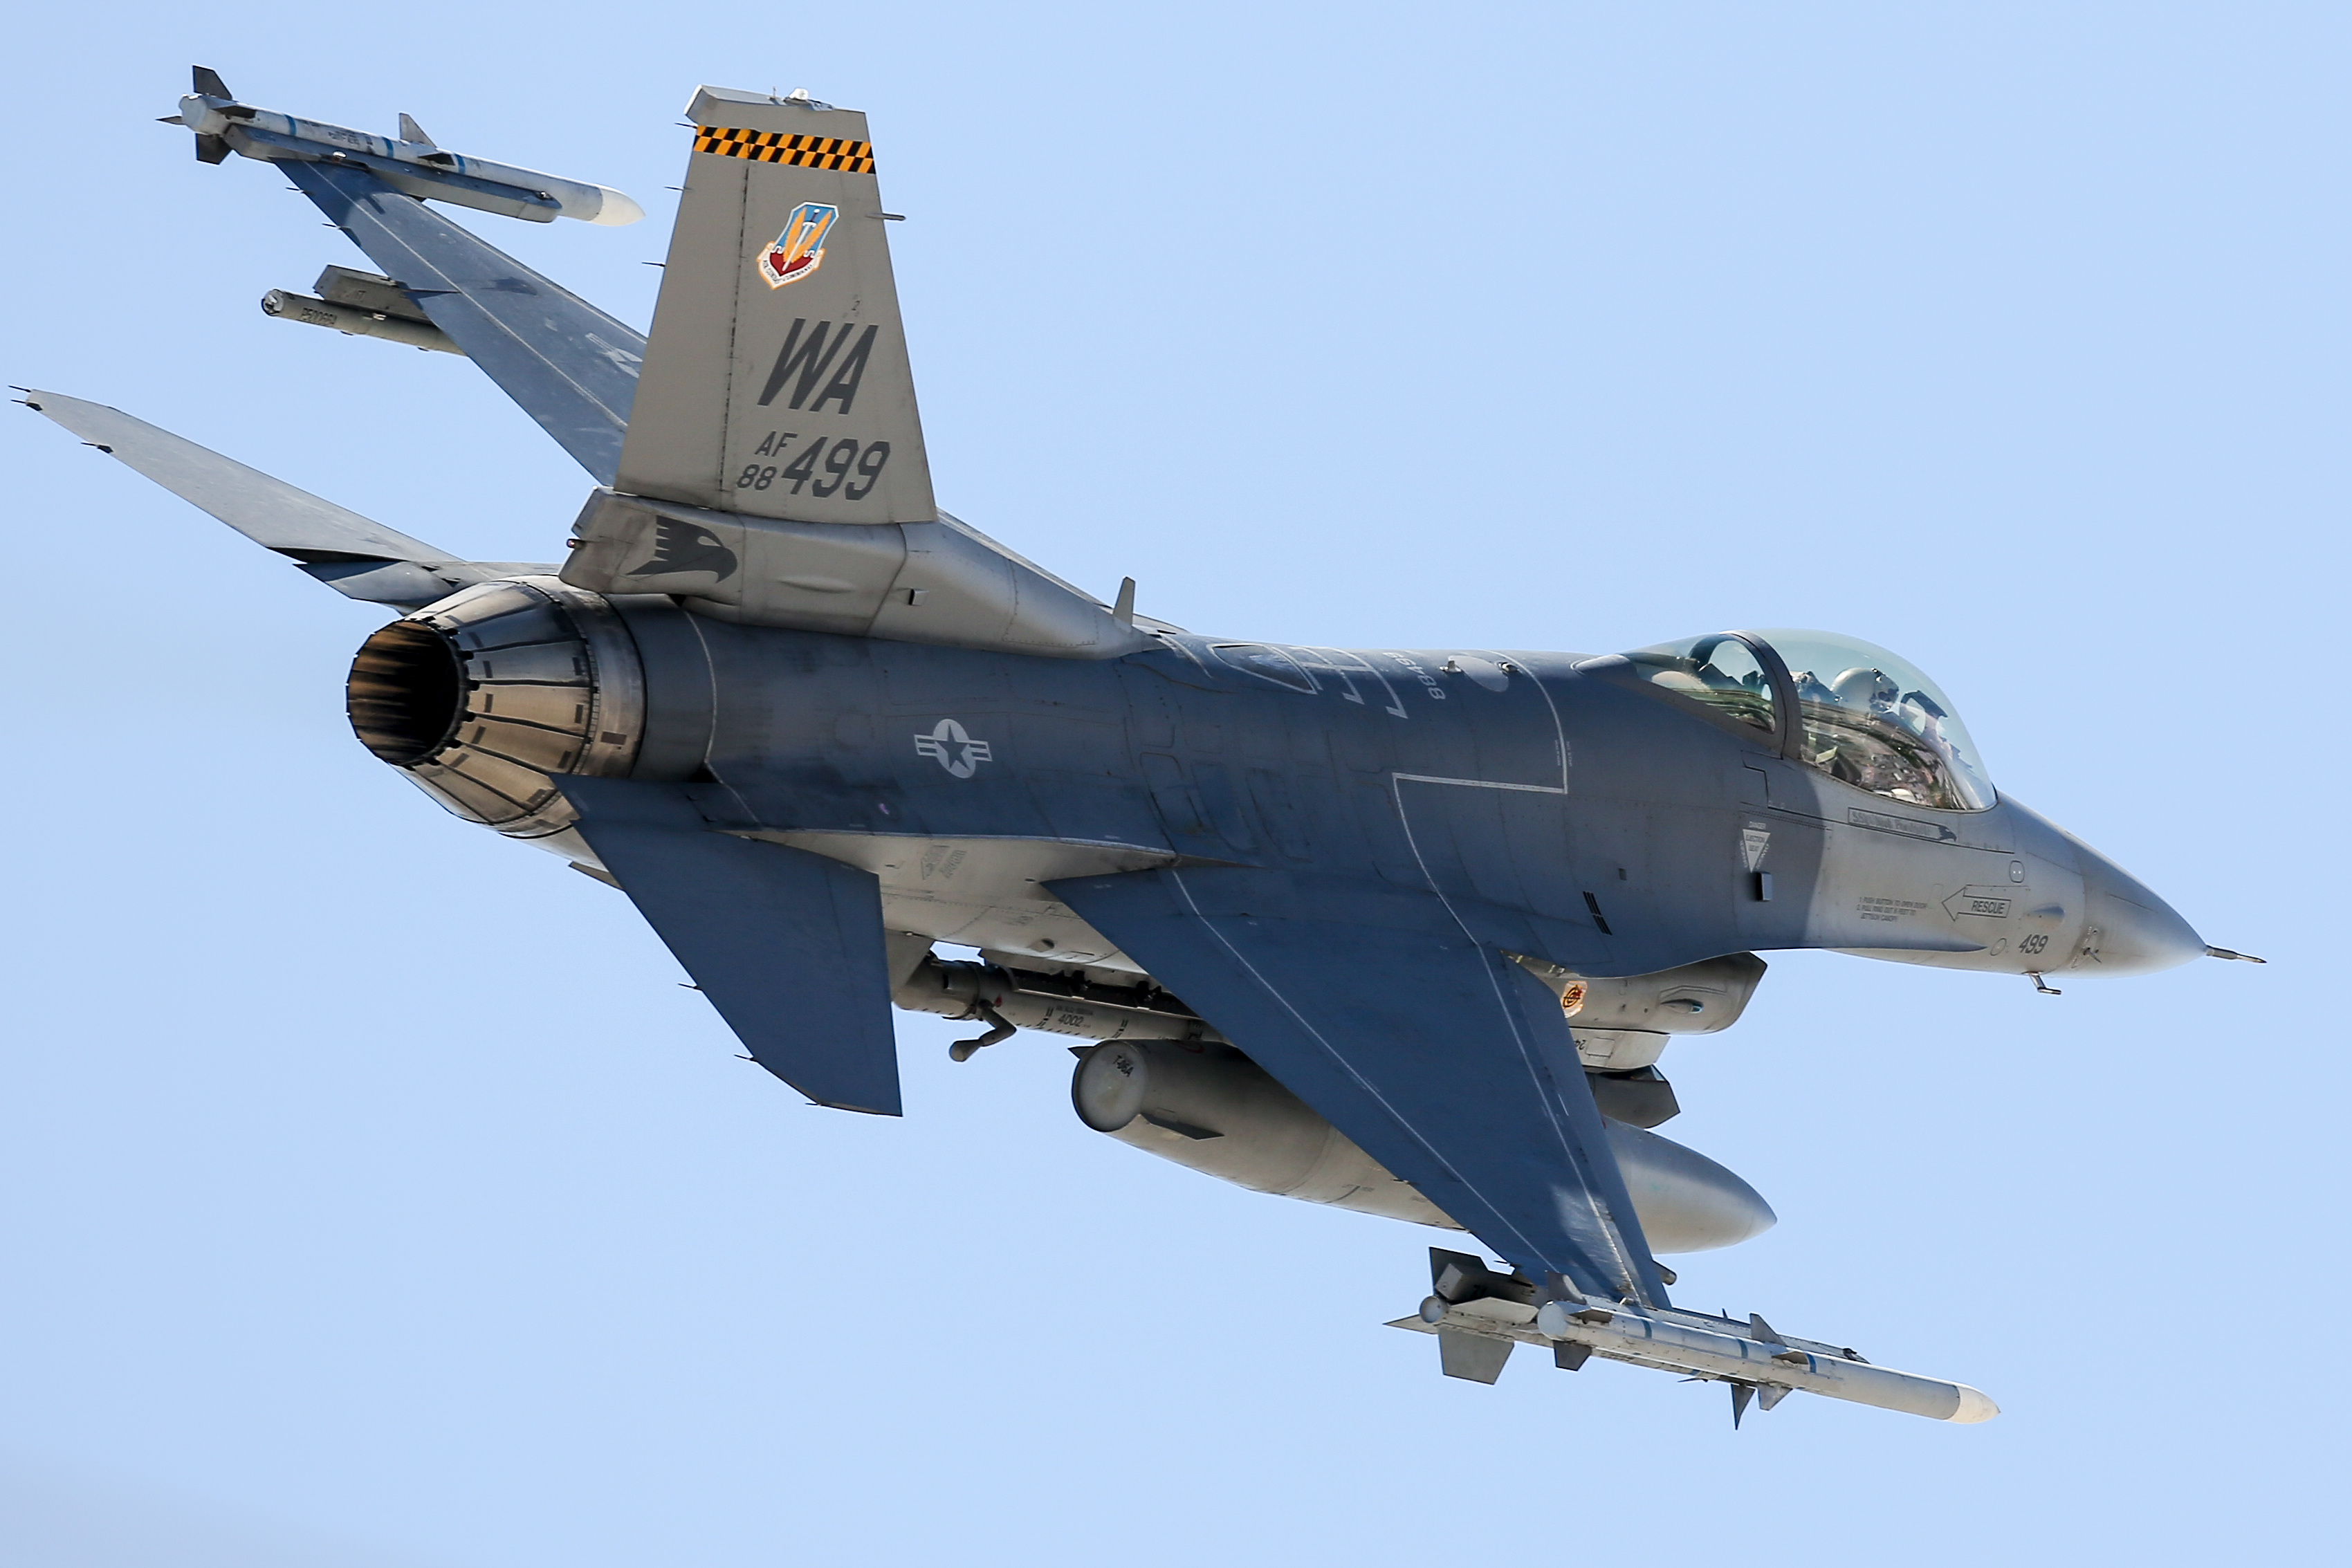 Wall Colmonoy is to overhaul the F-16 primary and secondary heat exchangers.